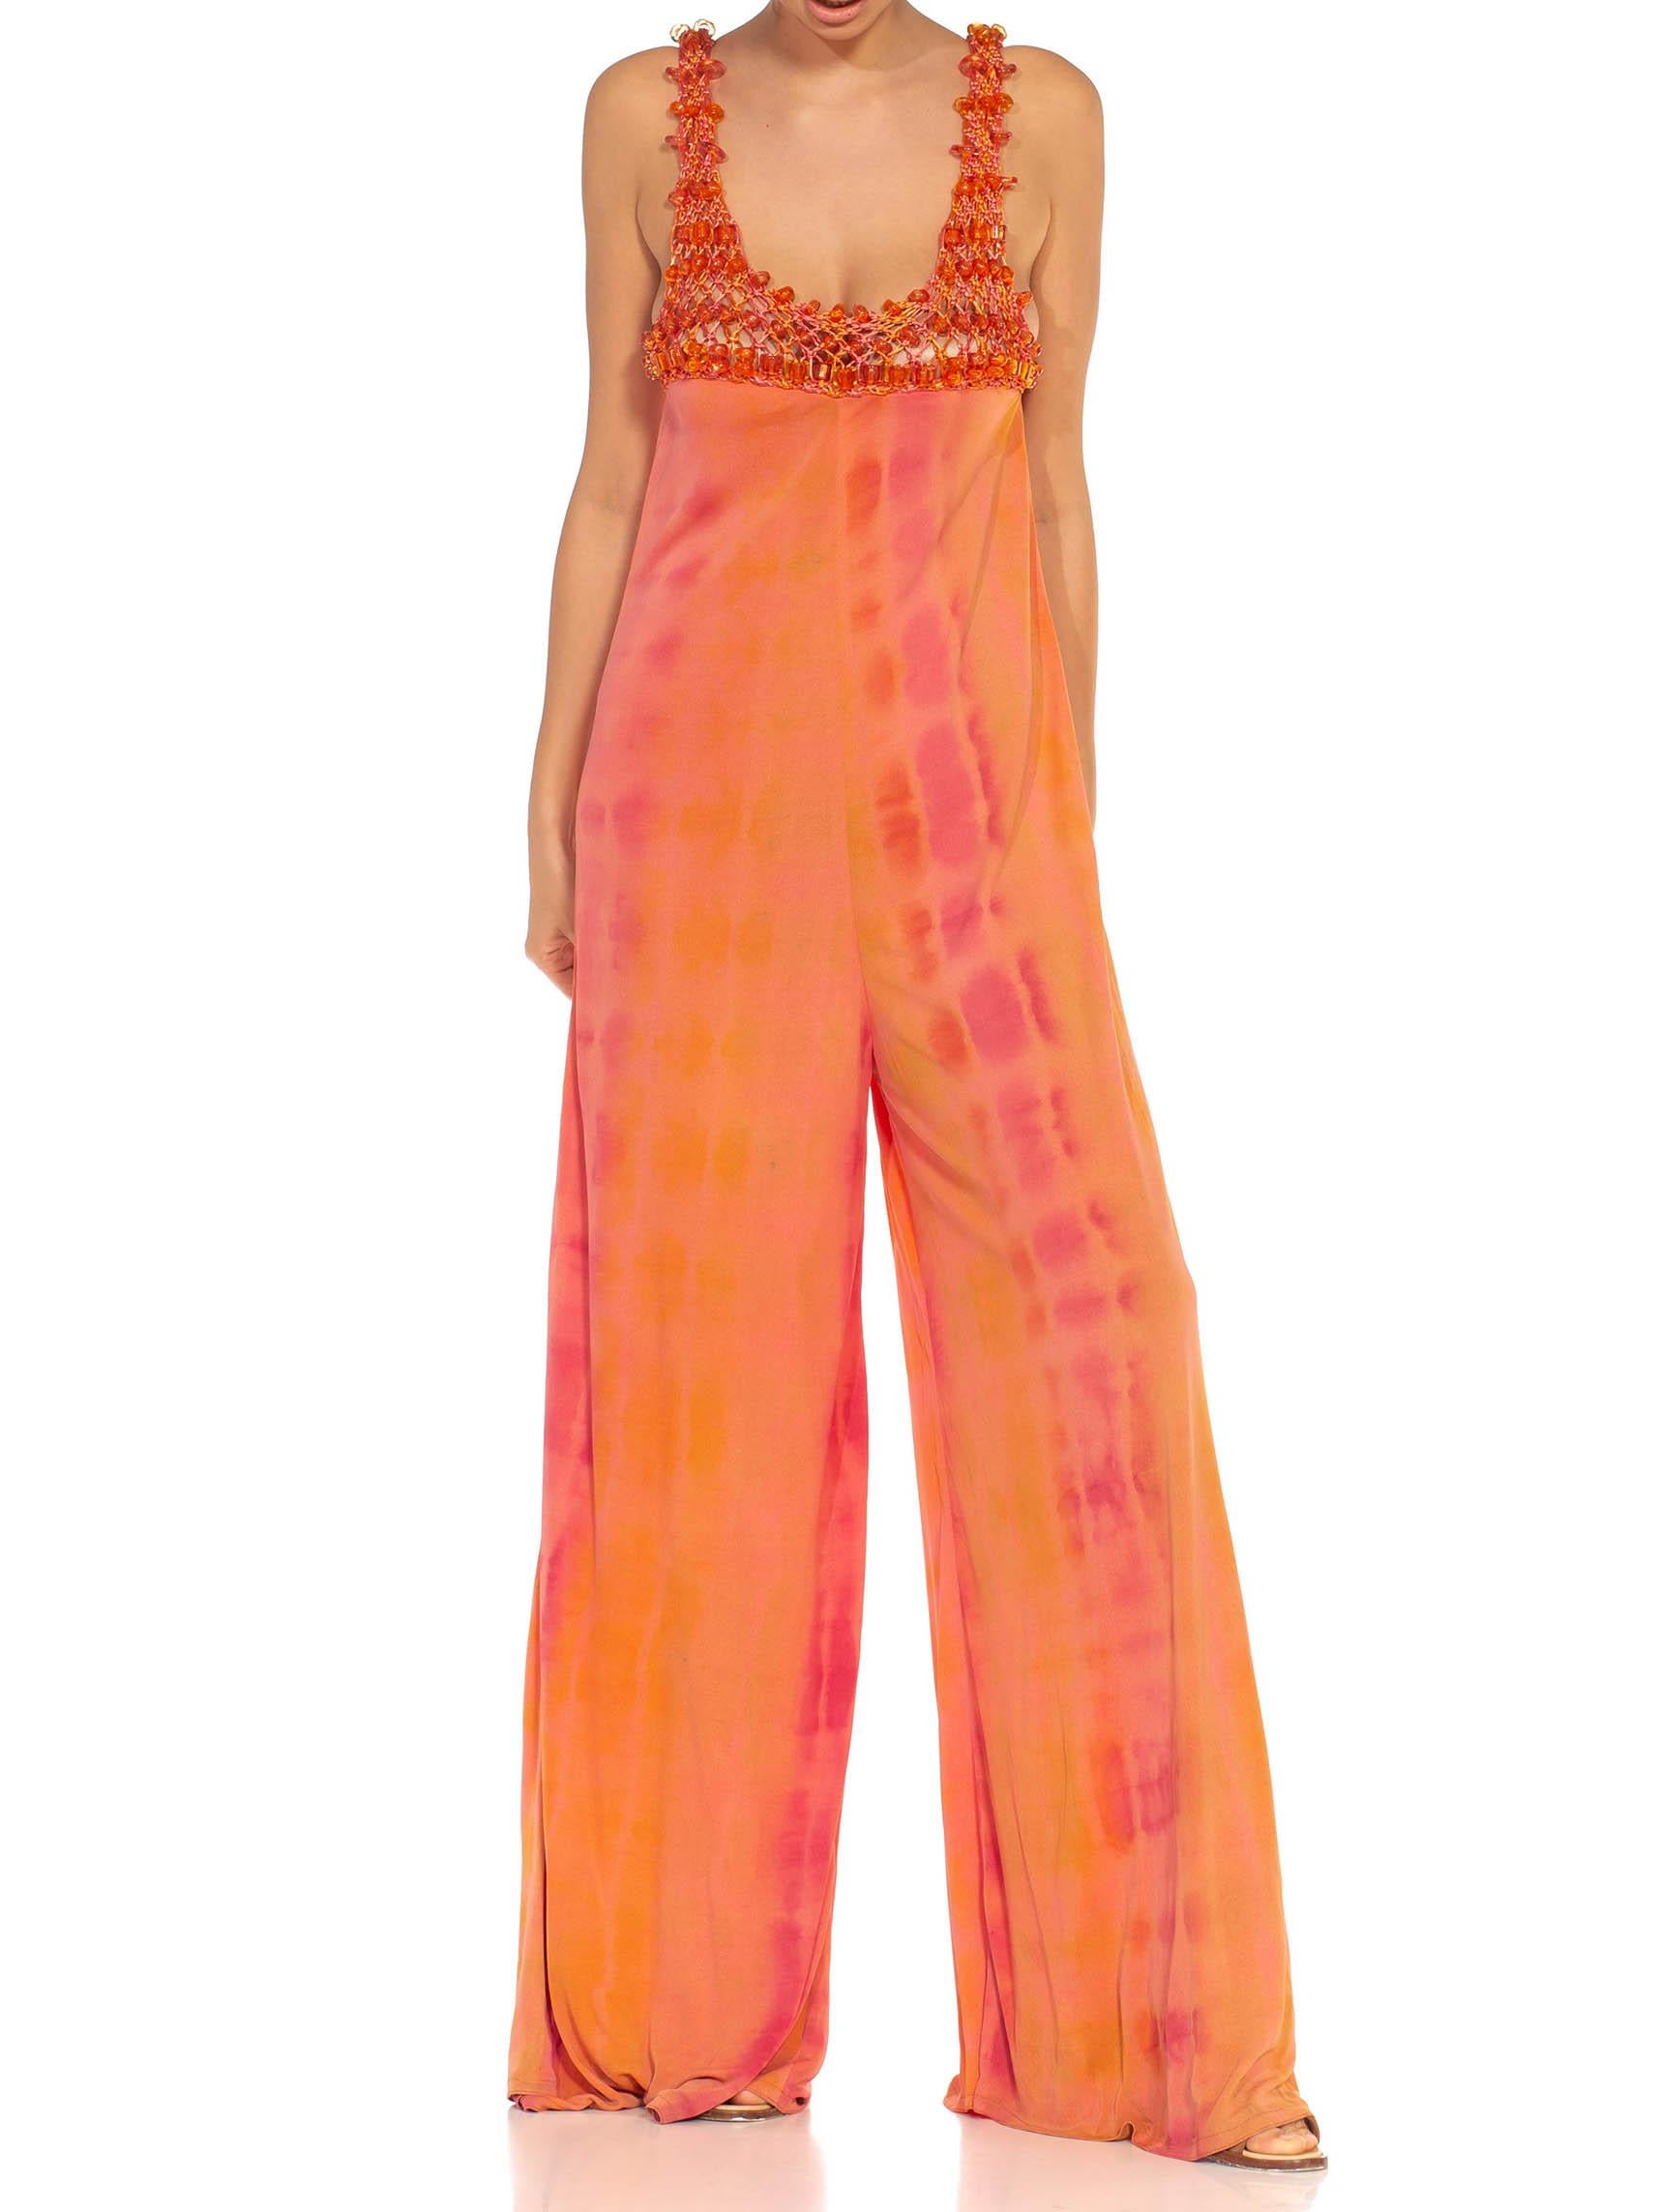 2000S Orange Peach Poly Blend Jersey Tie Dye Jumpsuit With Crochet Beaded Straps For Sale 2